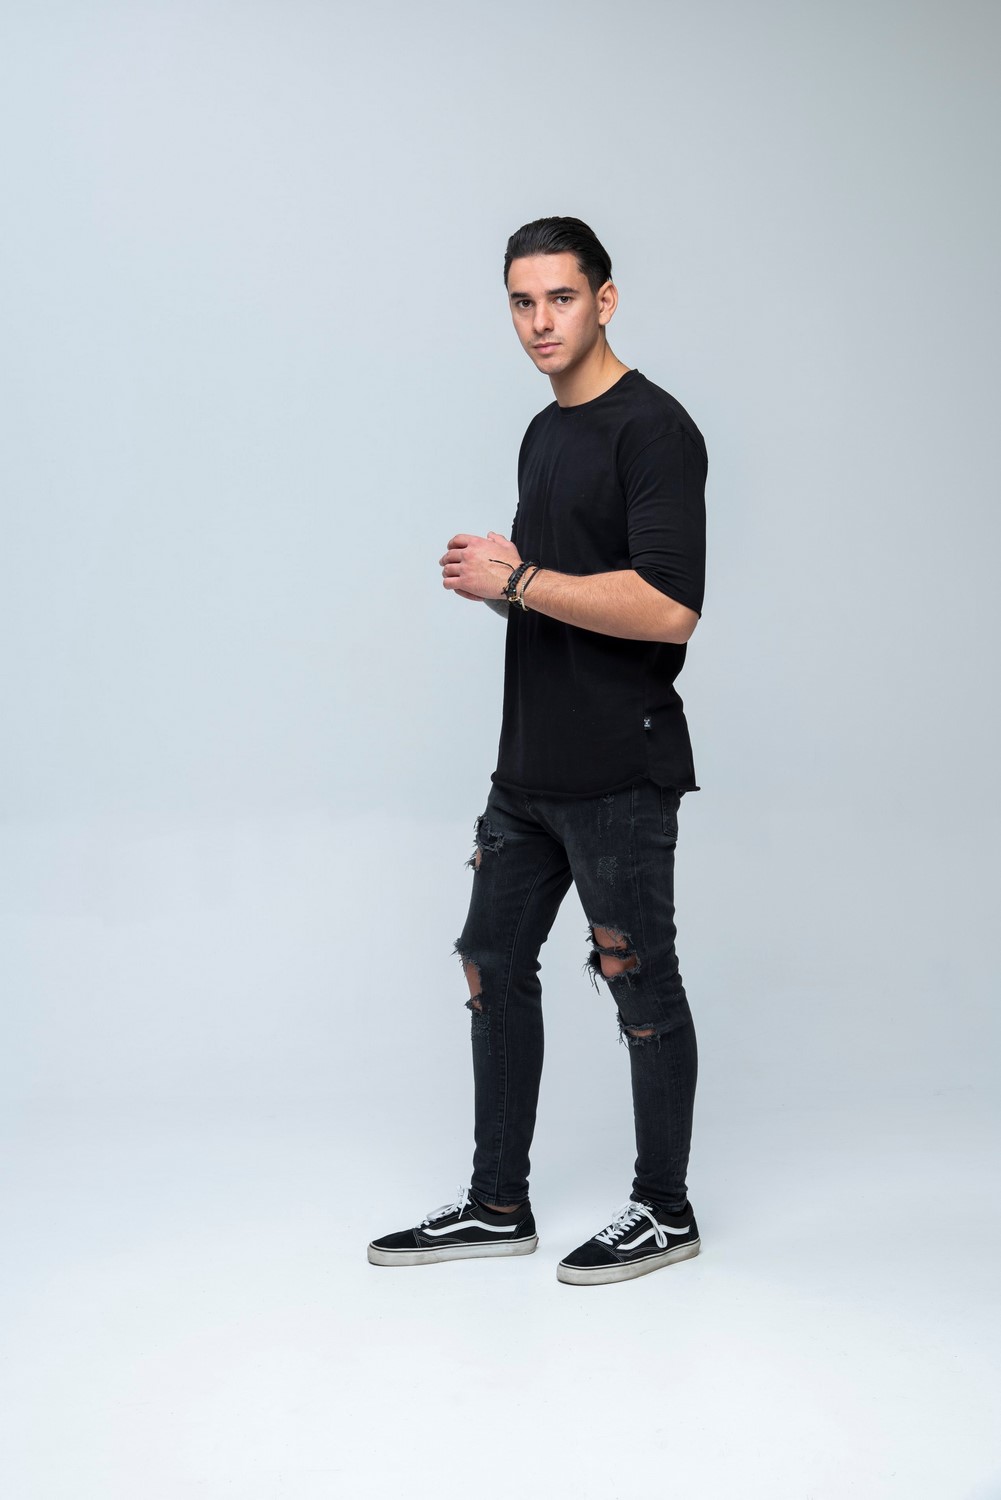 DON'T SS Carbon Tee Black